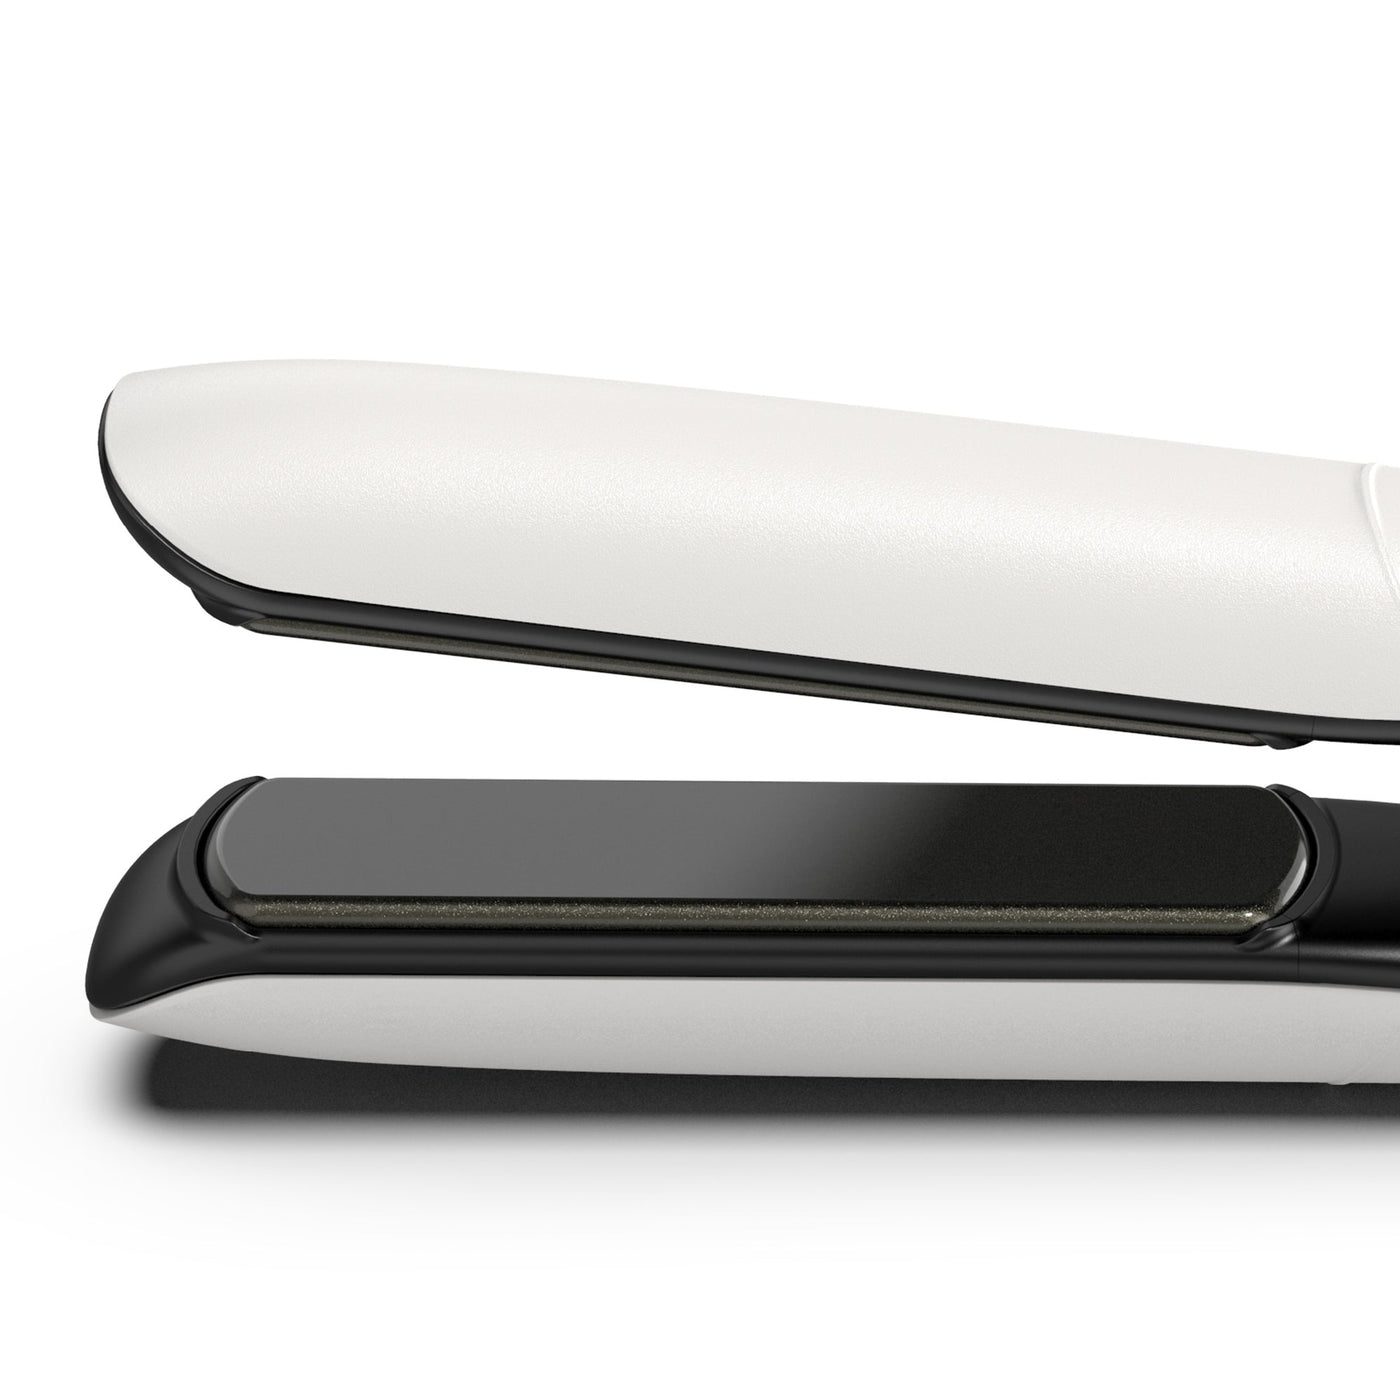 ghd Platinum+ Professional Hair Straightener - advanced, precision milled, floating plates (white)